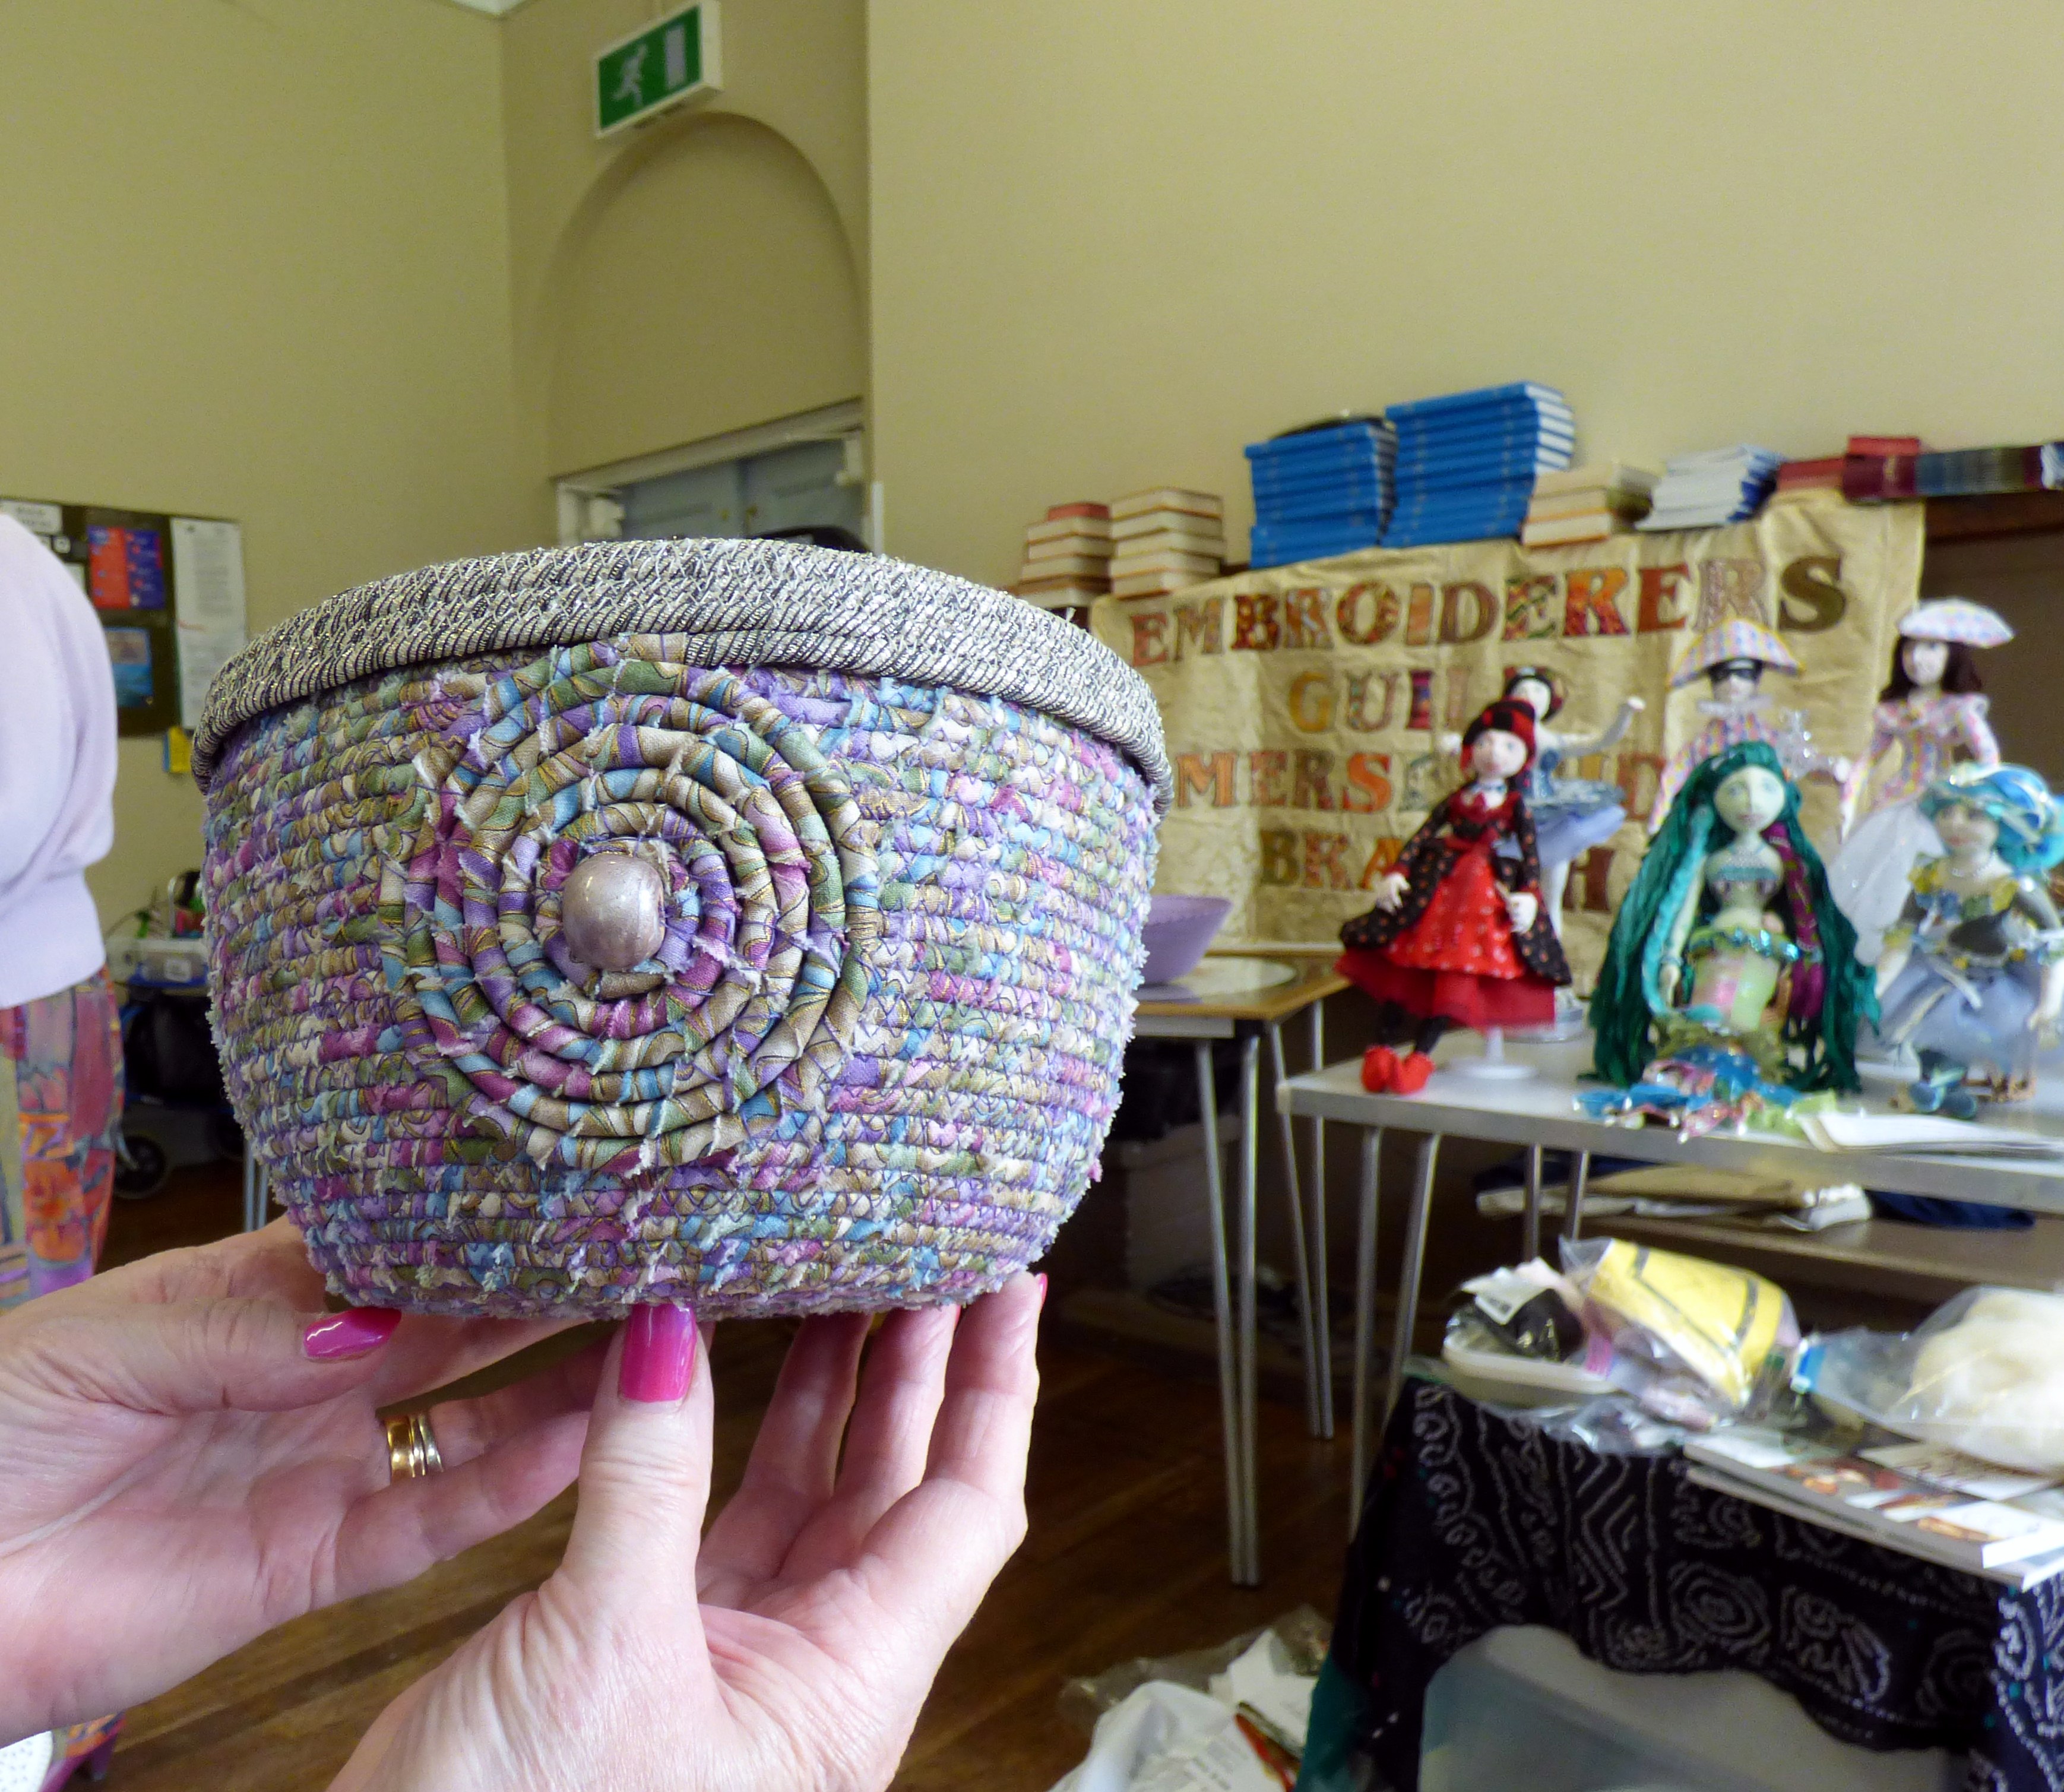 coiled container by Eileen Clark, Talk by members of Cheshire Borders branch @ MEG 2019